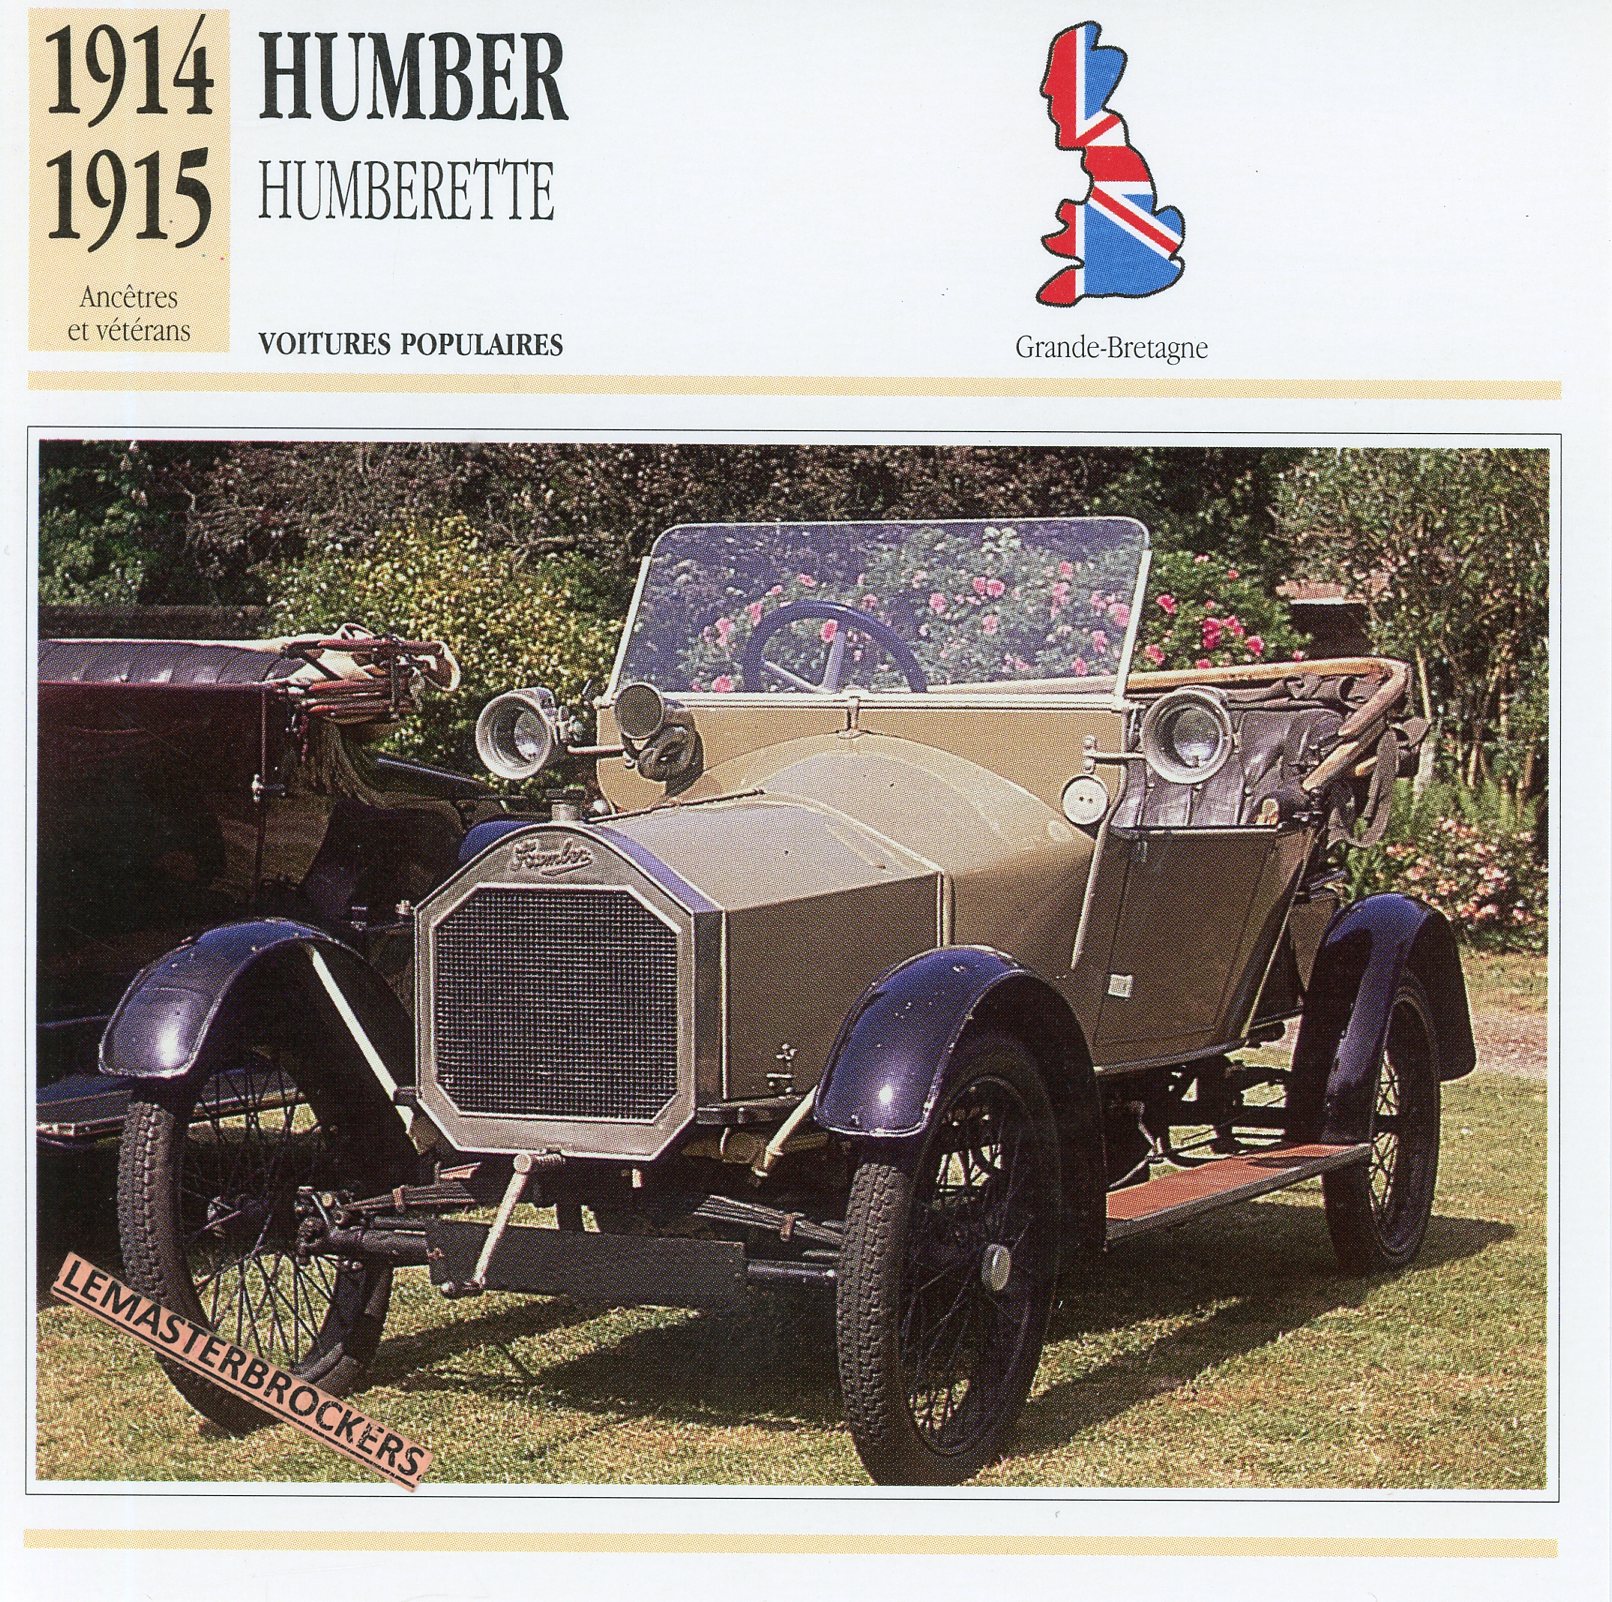 FICHE-AUTO-HUMBER-HUMBERETTE-LEMASTERBROCKERS-CARD-CARS-ATLAS